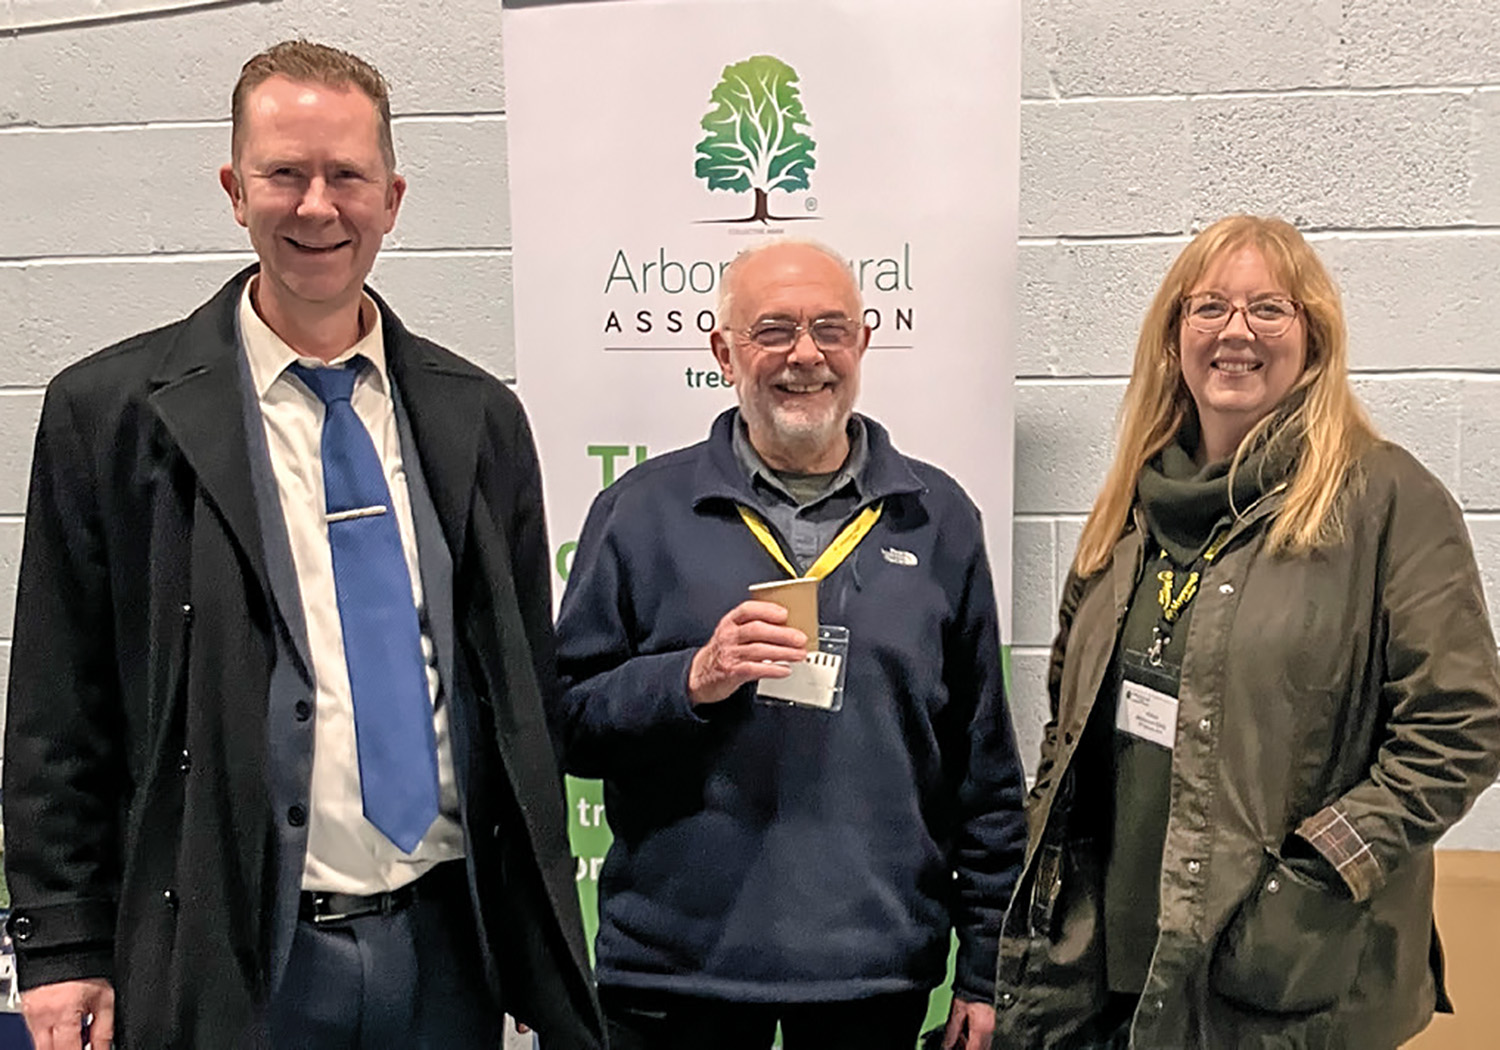 Supporting Arbor Day at Myerscough. Left to right: Lee Thorne, Tim Beckley and Kelly Stewart.